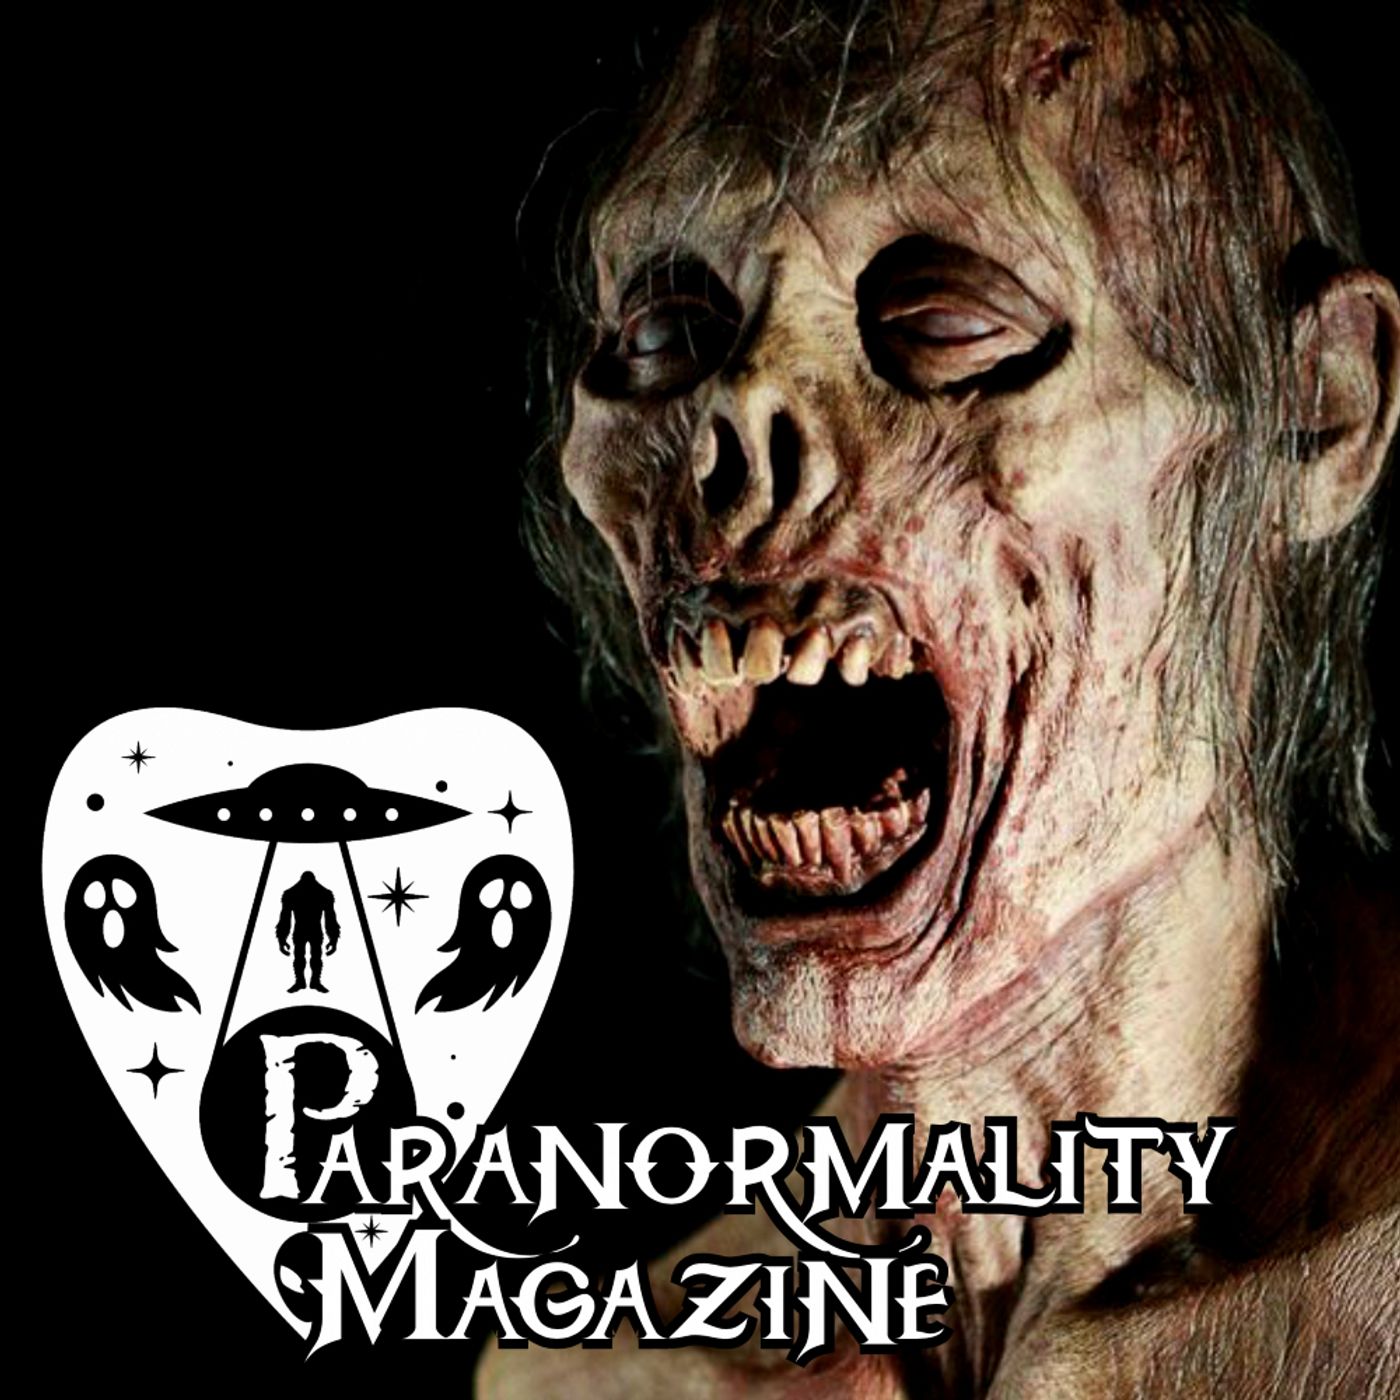 “ZOMBIES IN BRADSHAW” and More Fortean-Related Stories! #ParanormalityMag